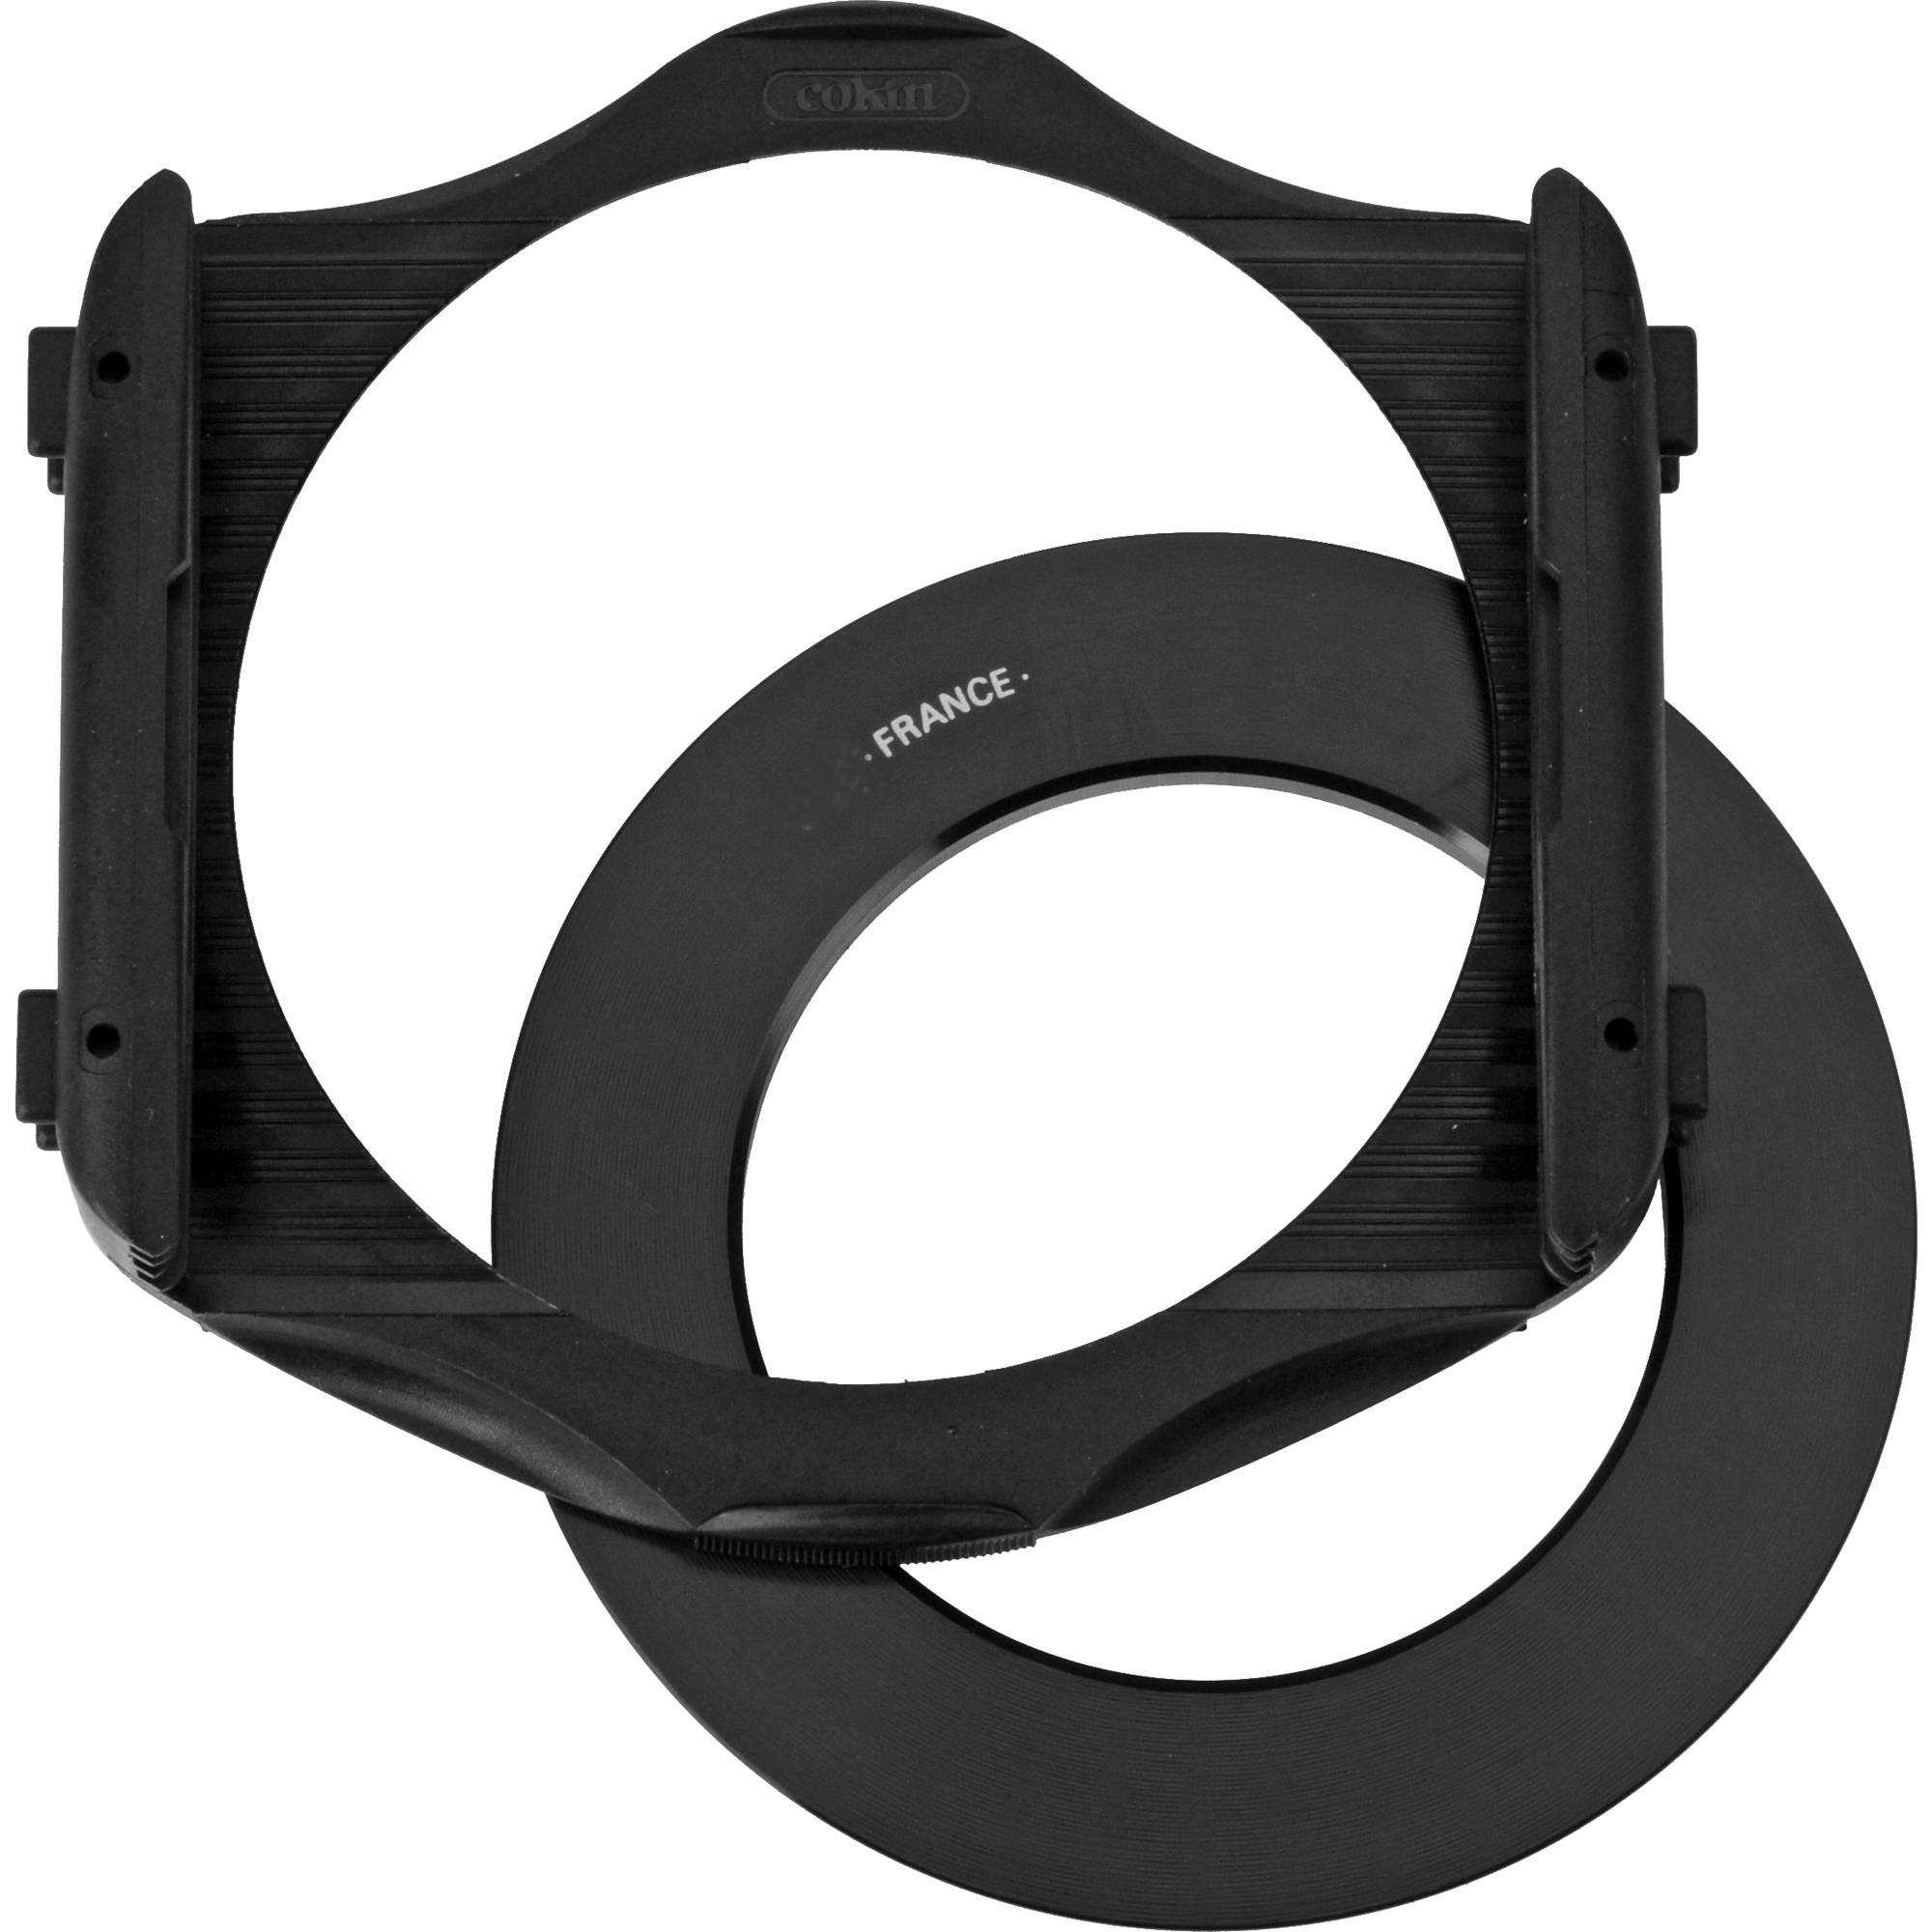 Cokin P Series Filter Holder And 72mm Adapter Ring Kit Cbp40072 Once the adapter and holder are attached to the lens filters can be slid into the holder and be used accordingly. cokin p series filter holder and 72mm adapter ring kit